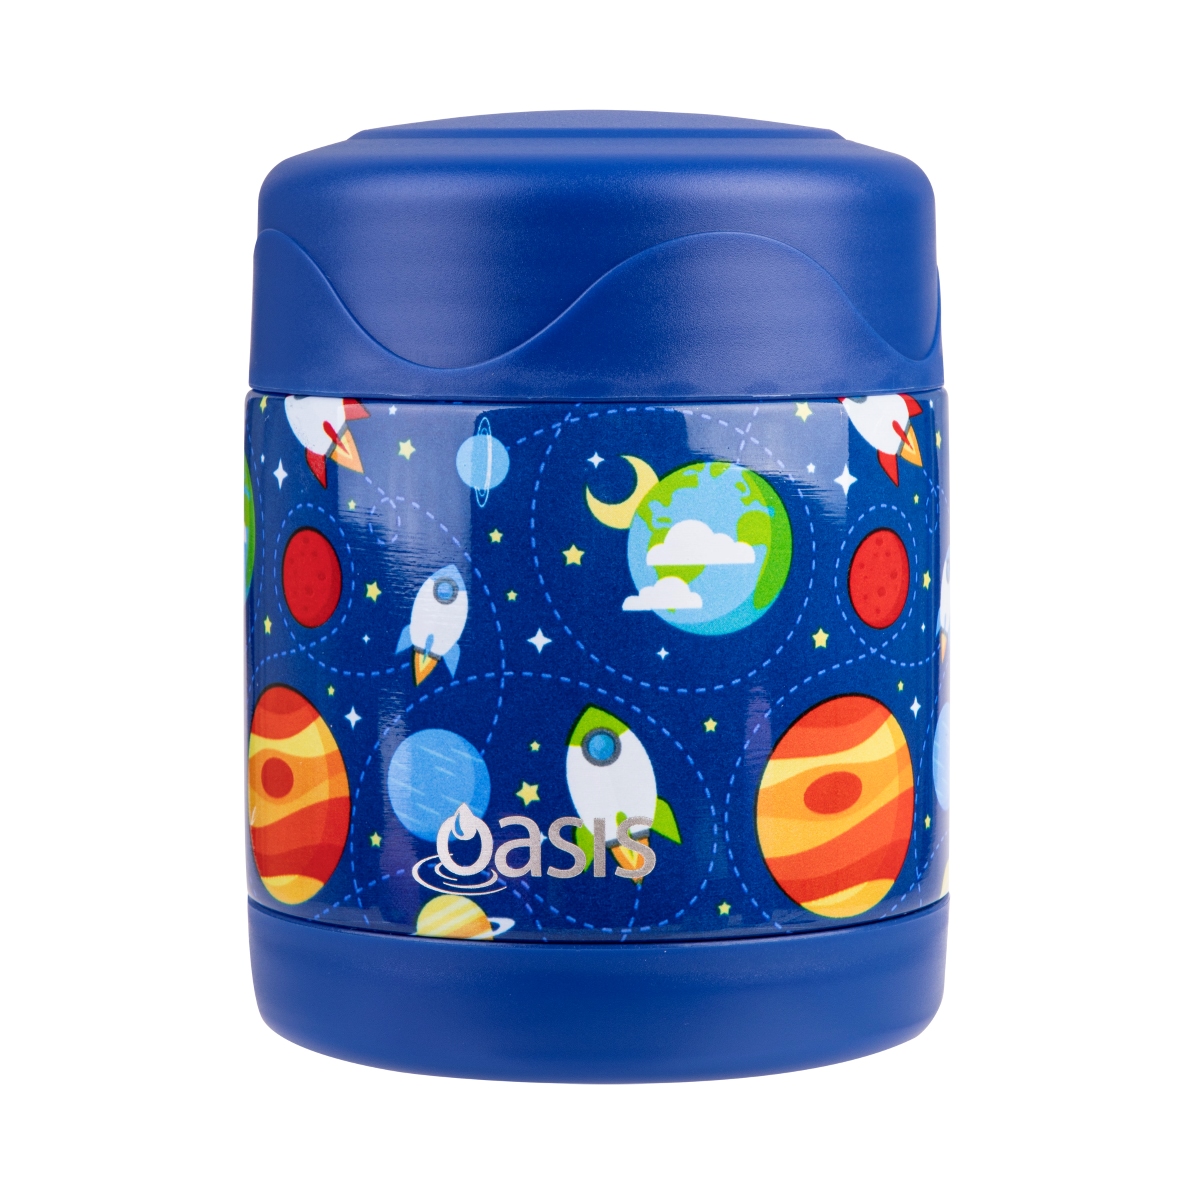 Oasis Stainless Steel Food Flask 300ml Outer Space